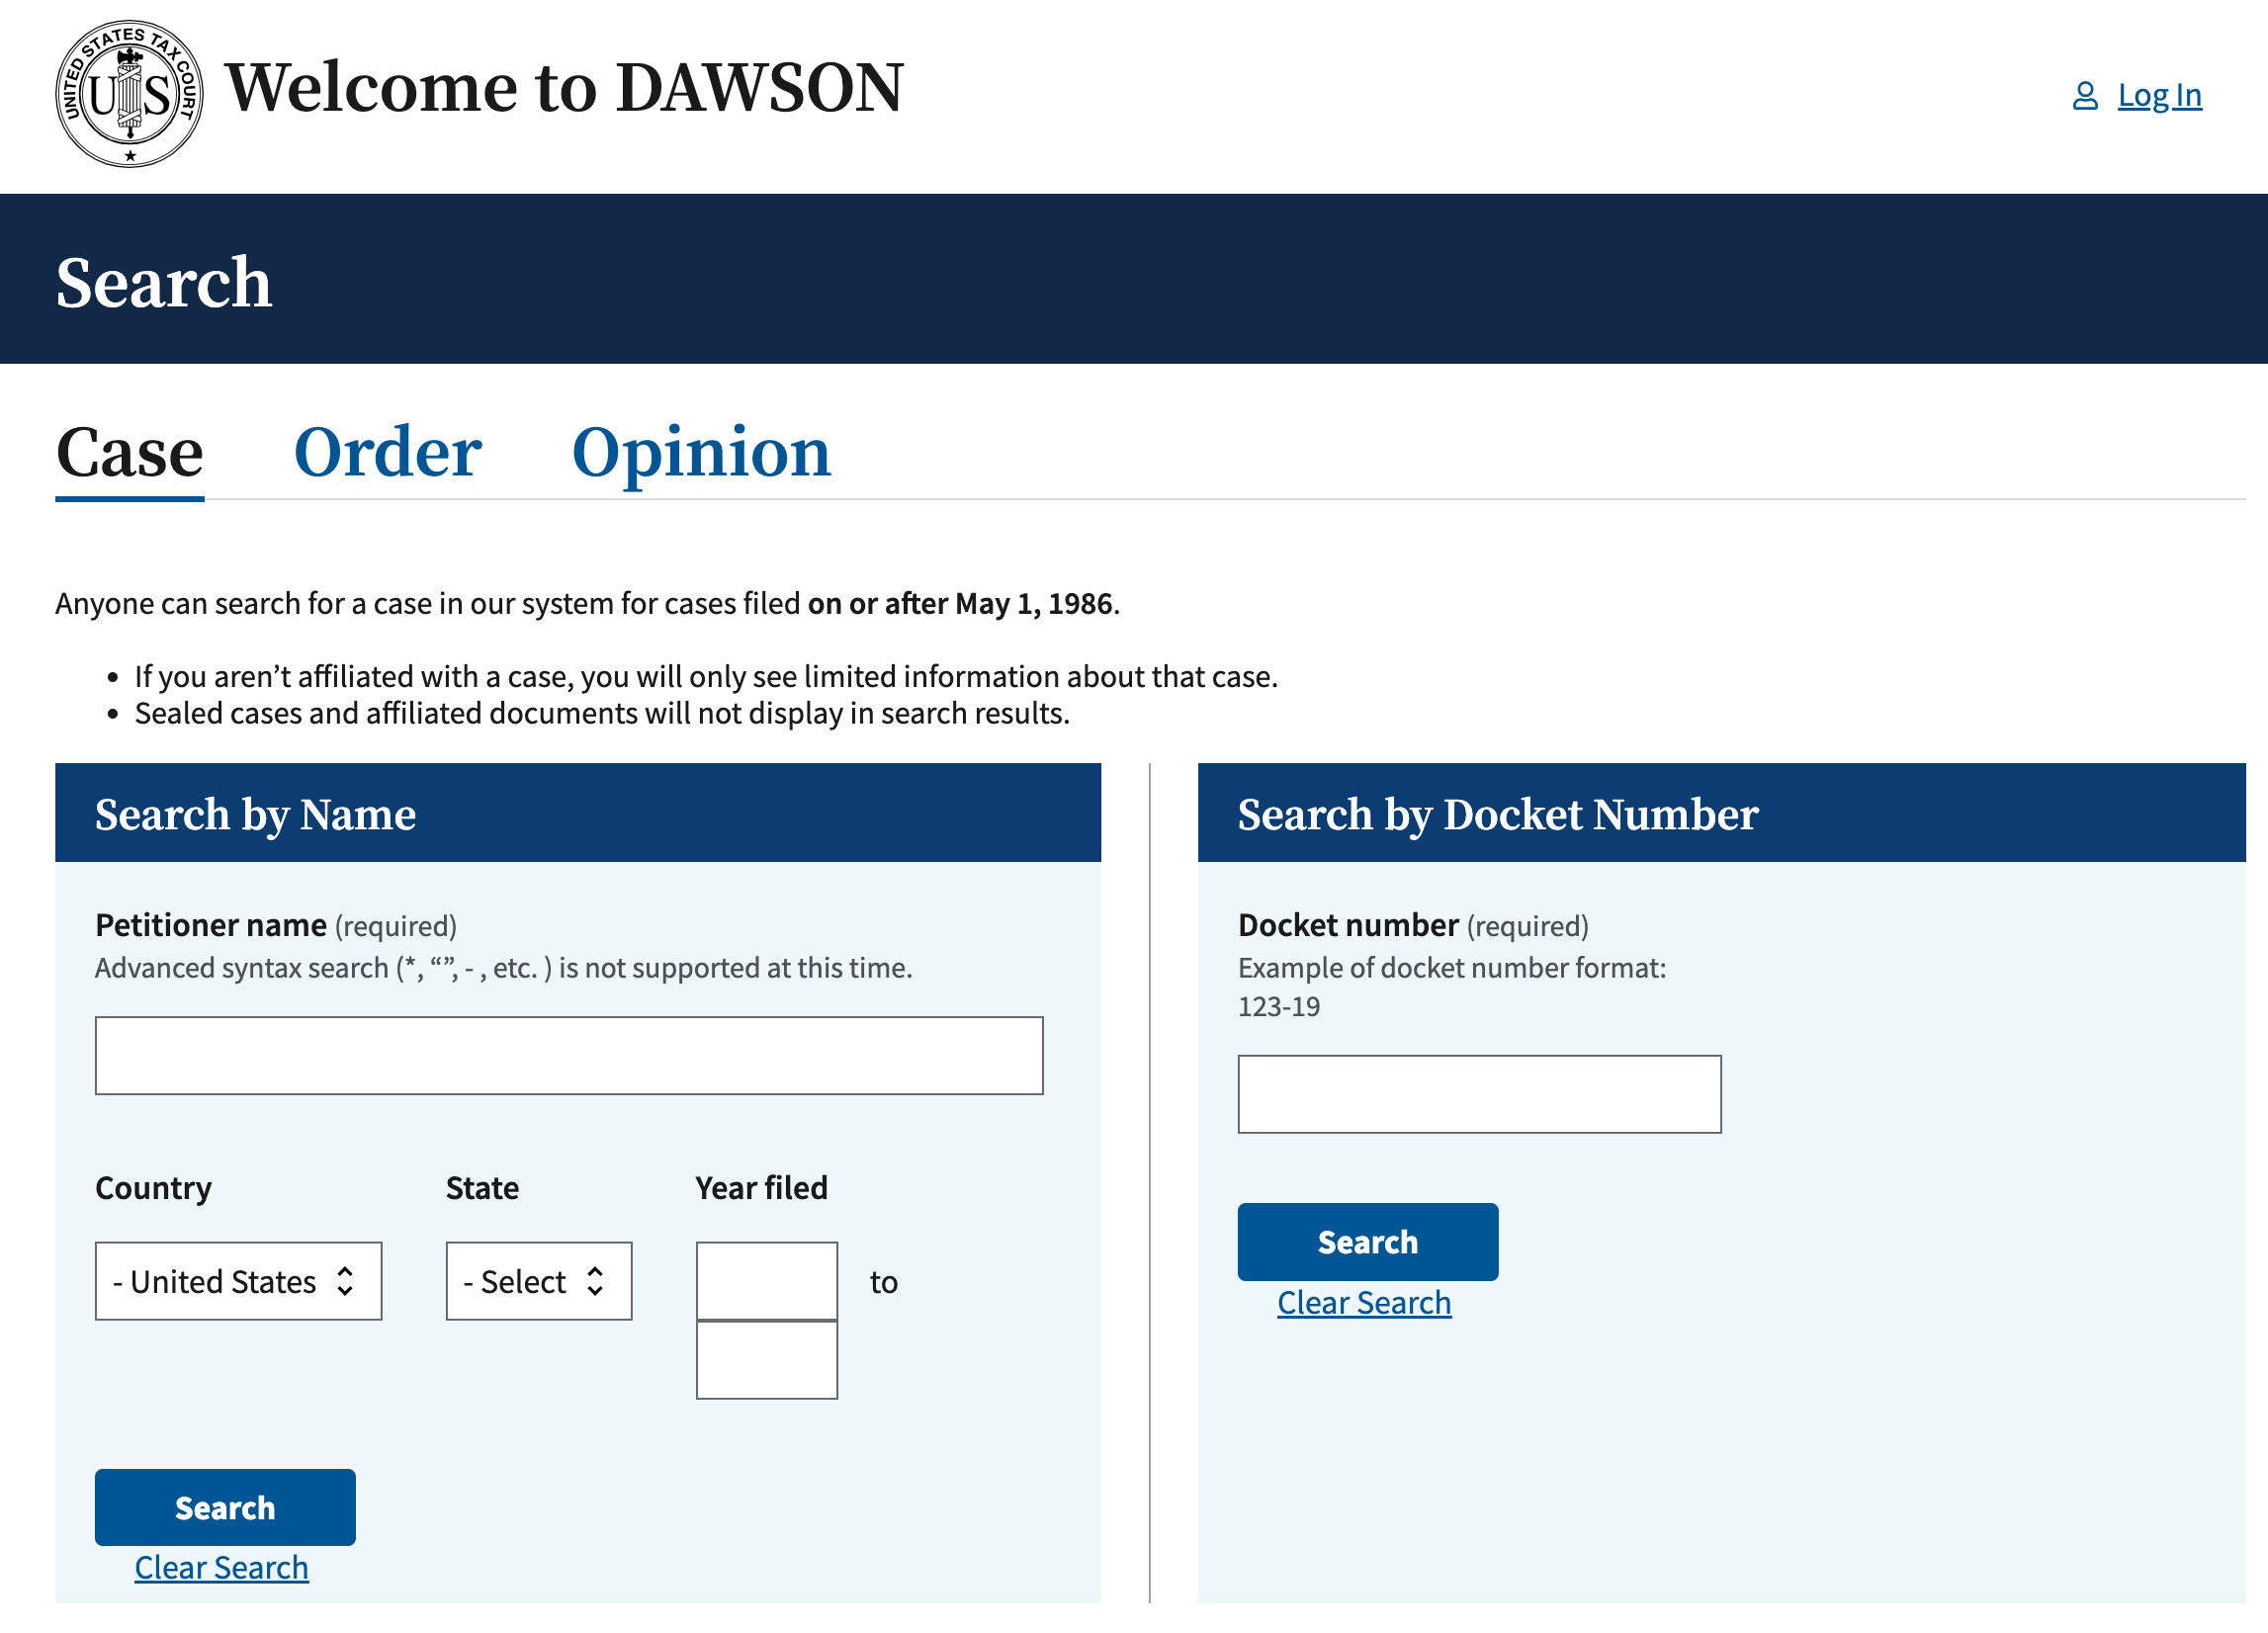 The U.S. Tax Court DAWSON electronic case file system's homepage